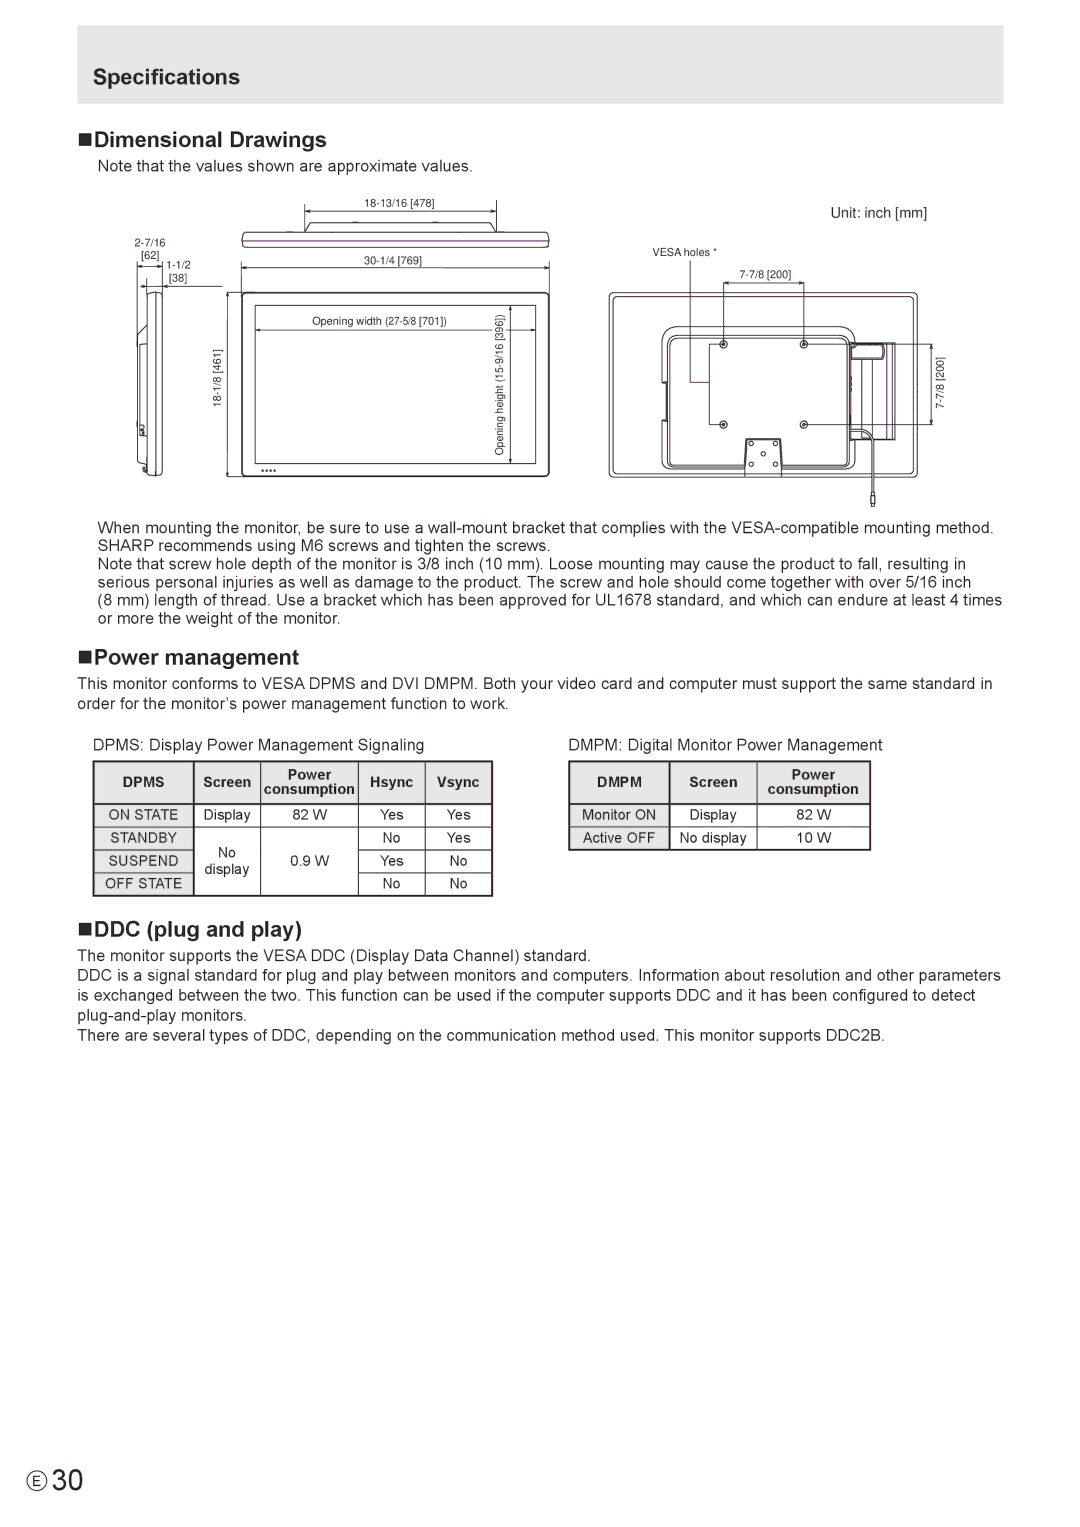 Sharp PN-T322B operation manual Specifications NDimensional Drawings, NPower management, NDDC plug and play 